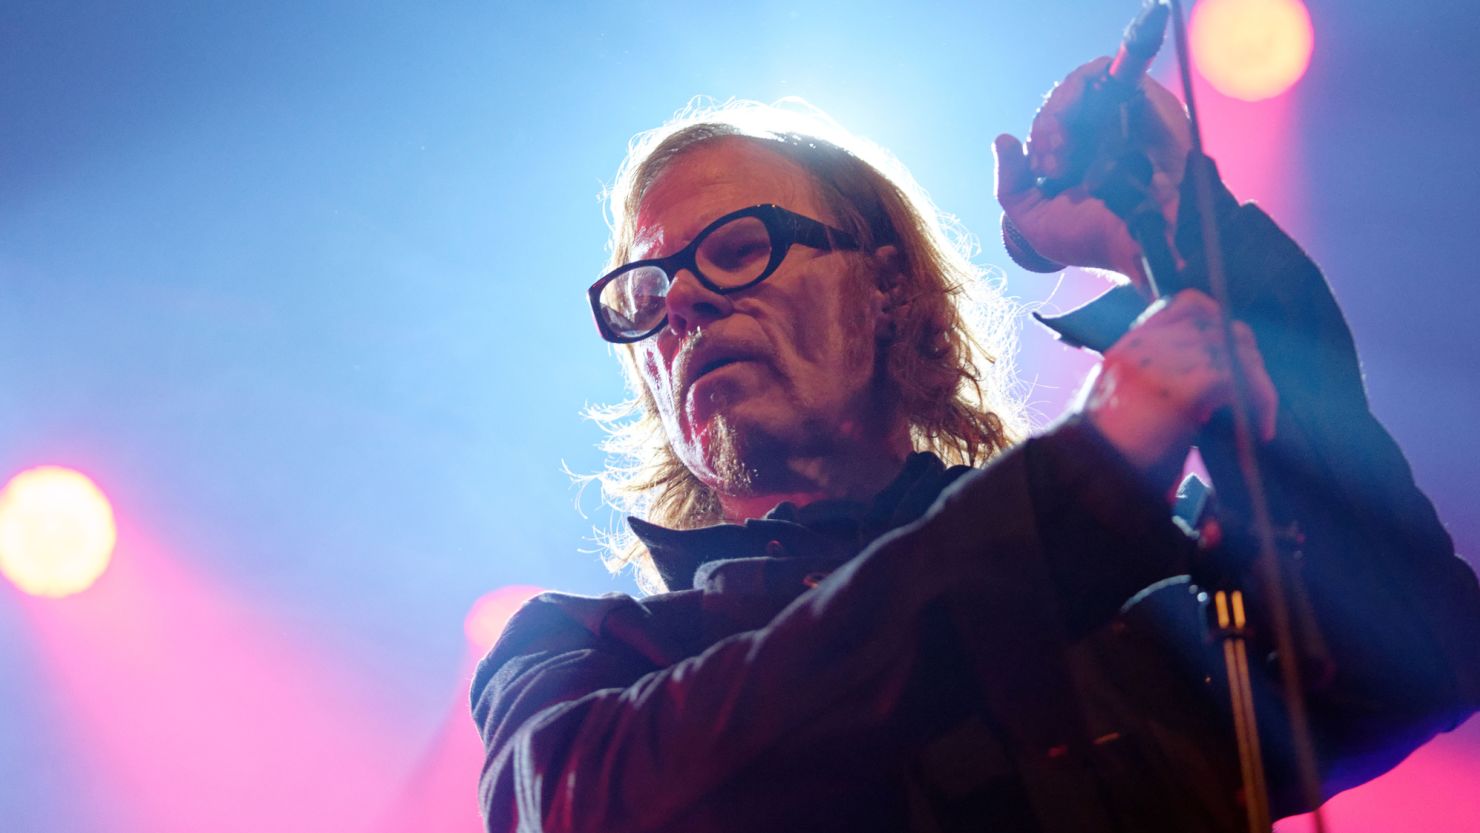 Mark Lanegan, a leader within Seattle's grunge music scene and frontman of influential act Screaming Trees, has died at 57. 